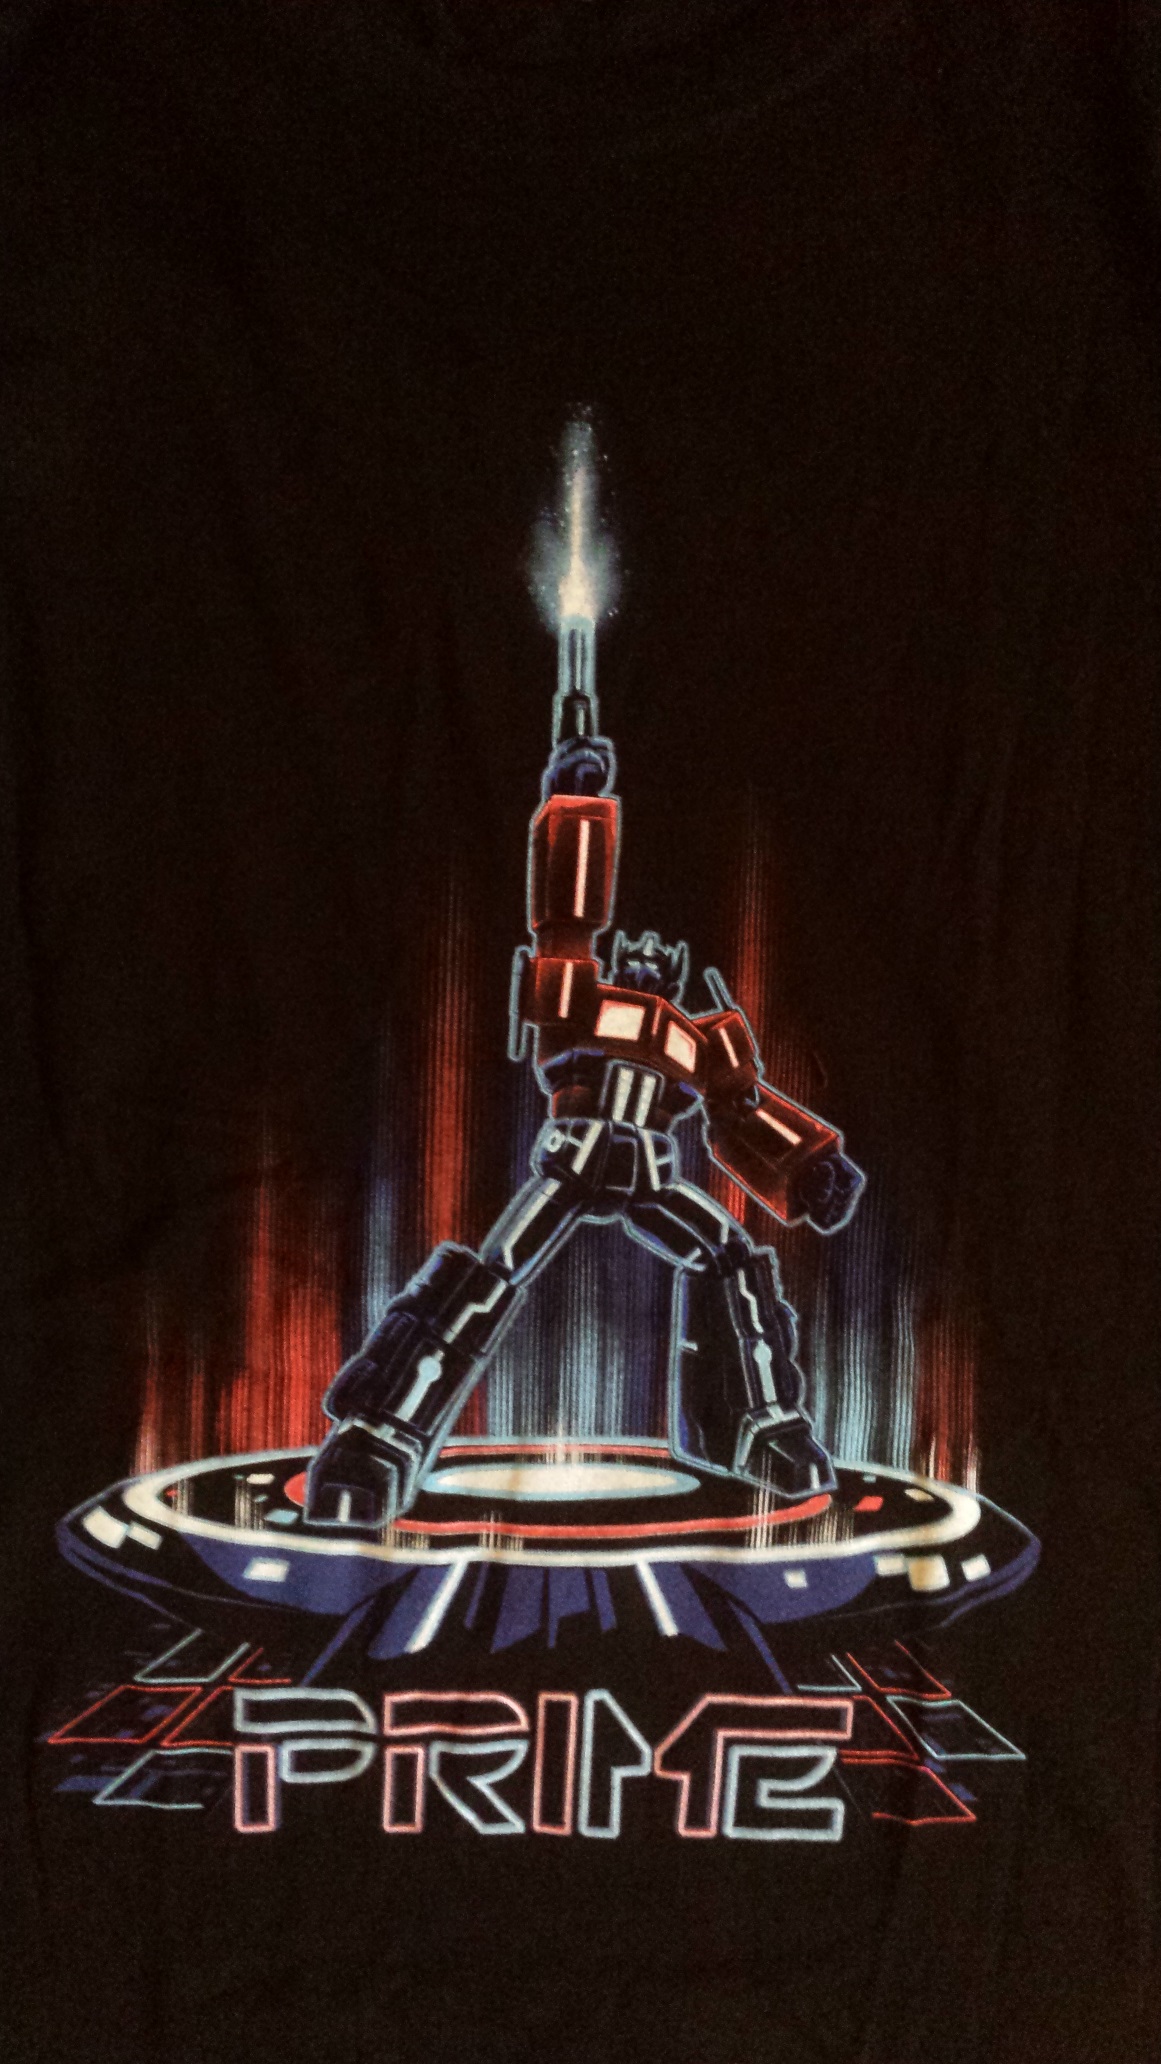 Cyber themed loot crate: transformers/tron tshirt